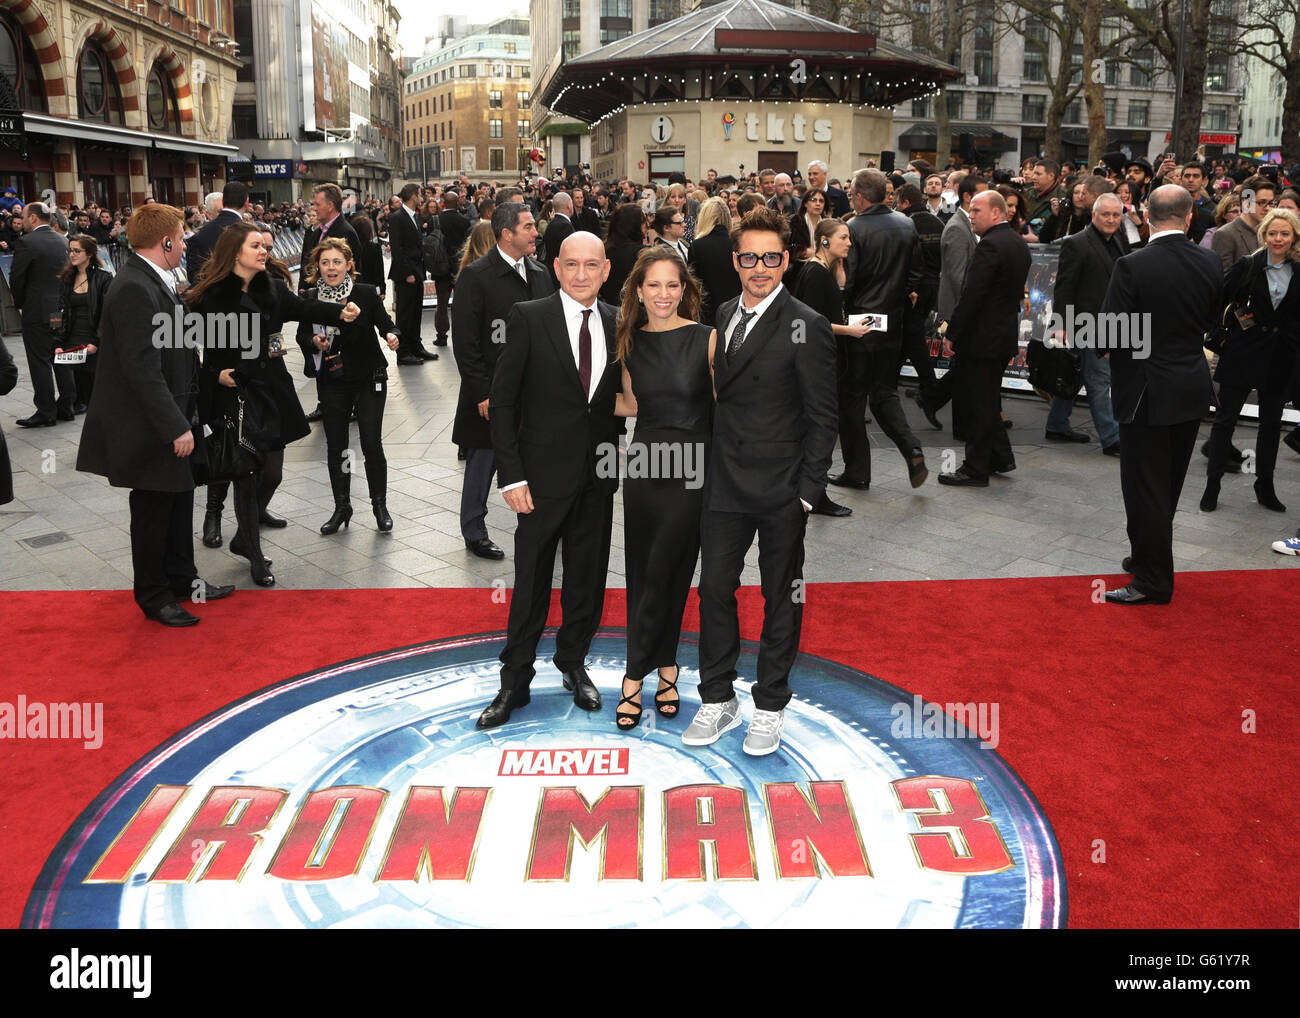 Sir Ben Kingsley, Susan Downey and Robert Downey Jr arriving for the premiere of Iron Man 3 at the Odeon Leicester Square, London. Stock Photo